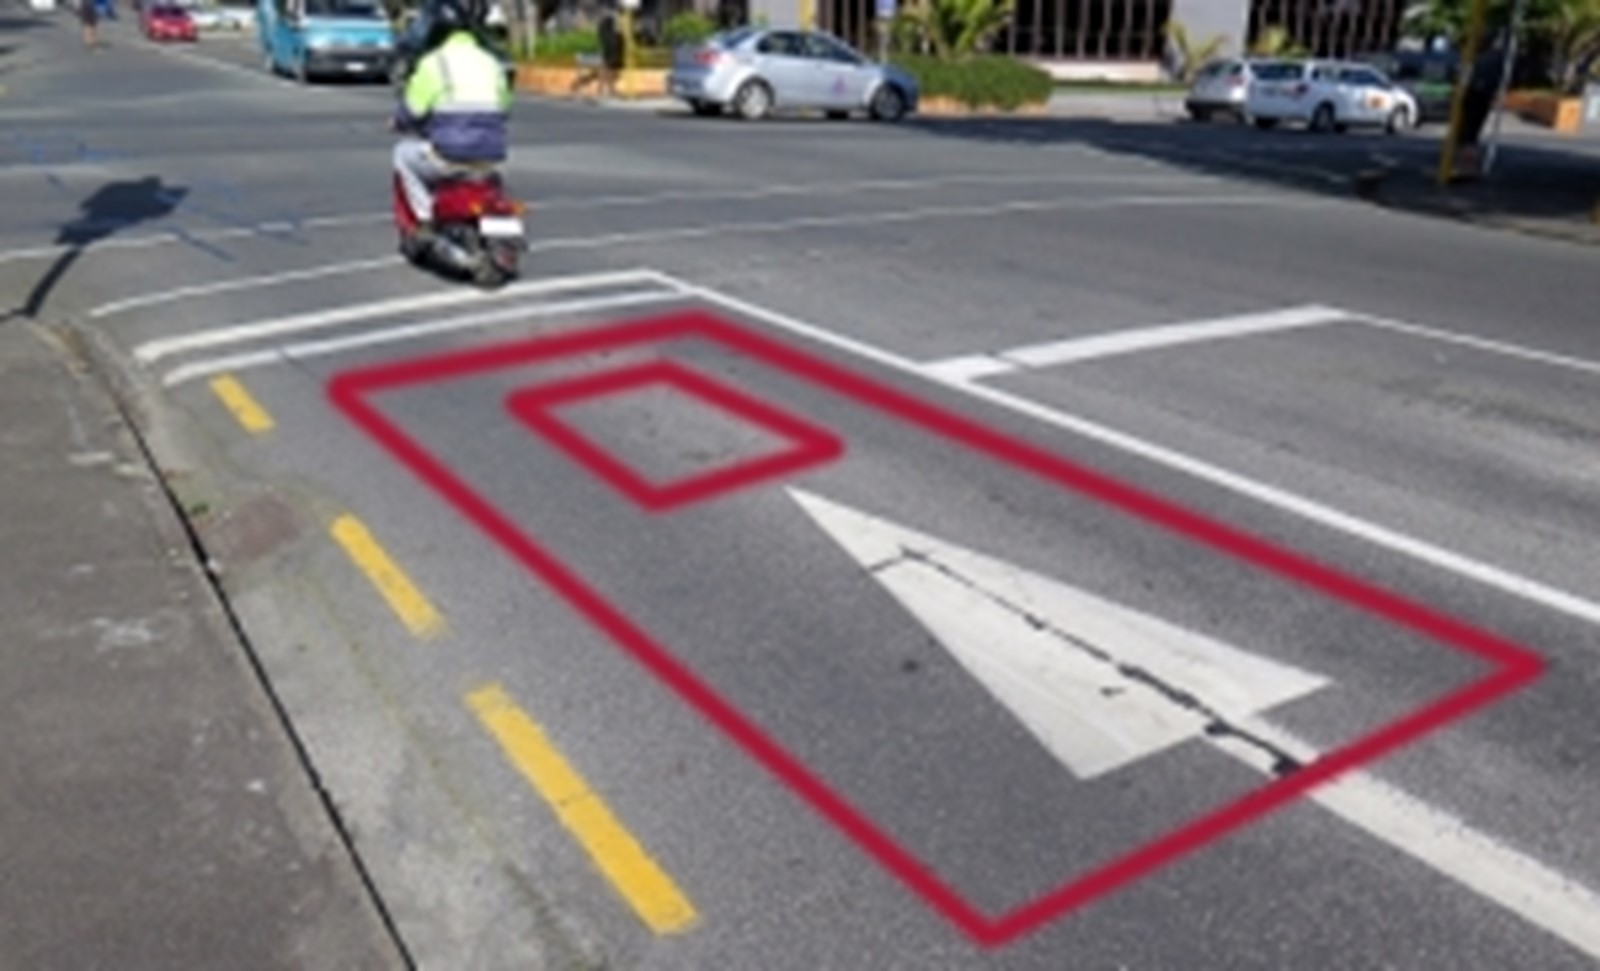 Scooter and traffic loops marked